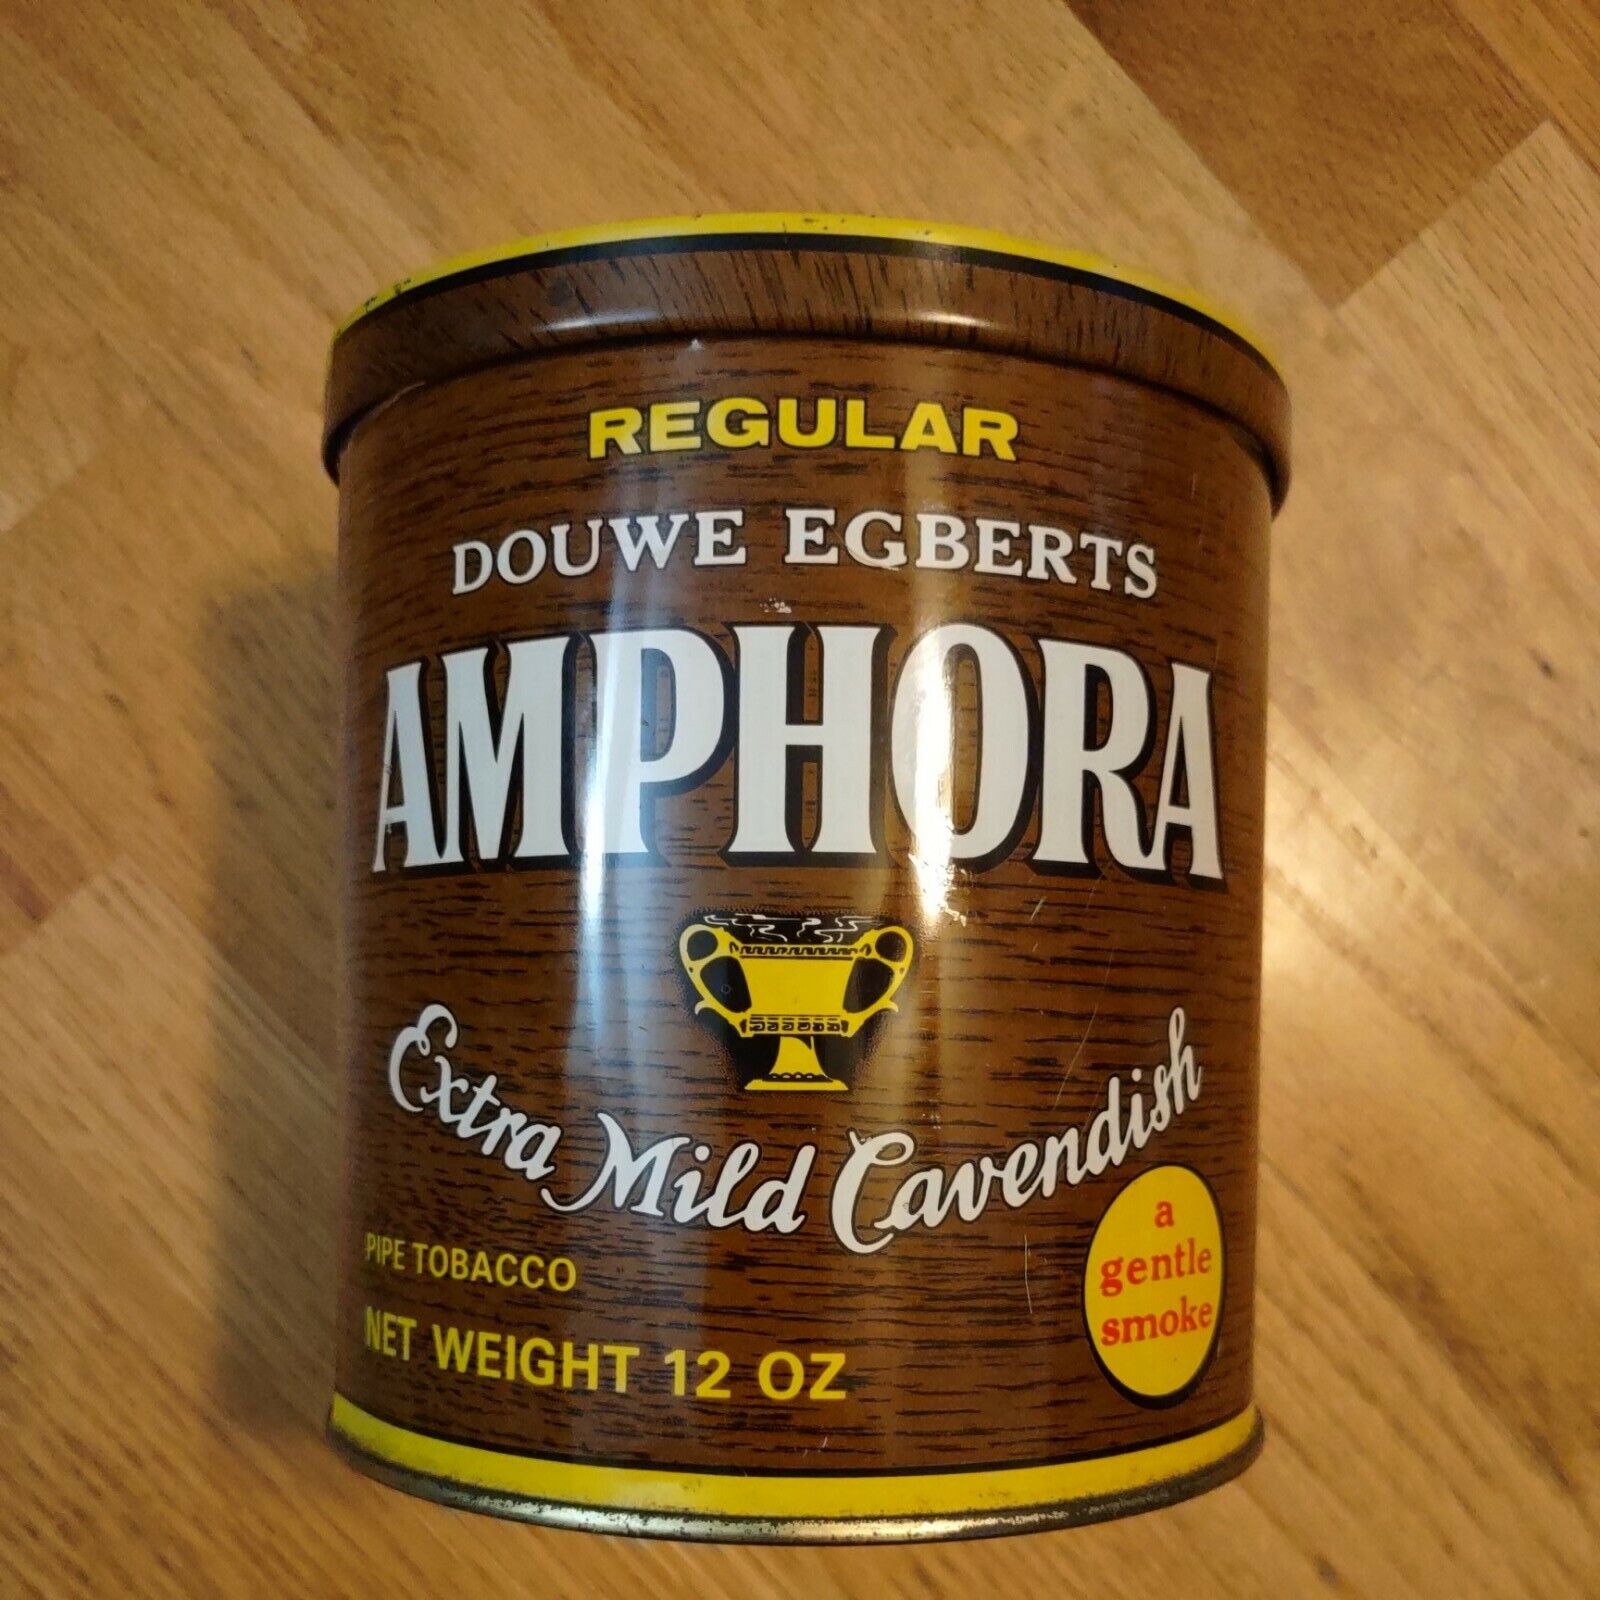 Vintage Douwe Egberts Amphora 12 Oz. Tabacco Tin Great Graphics And Colors